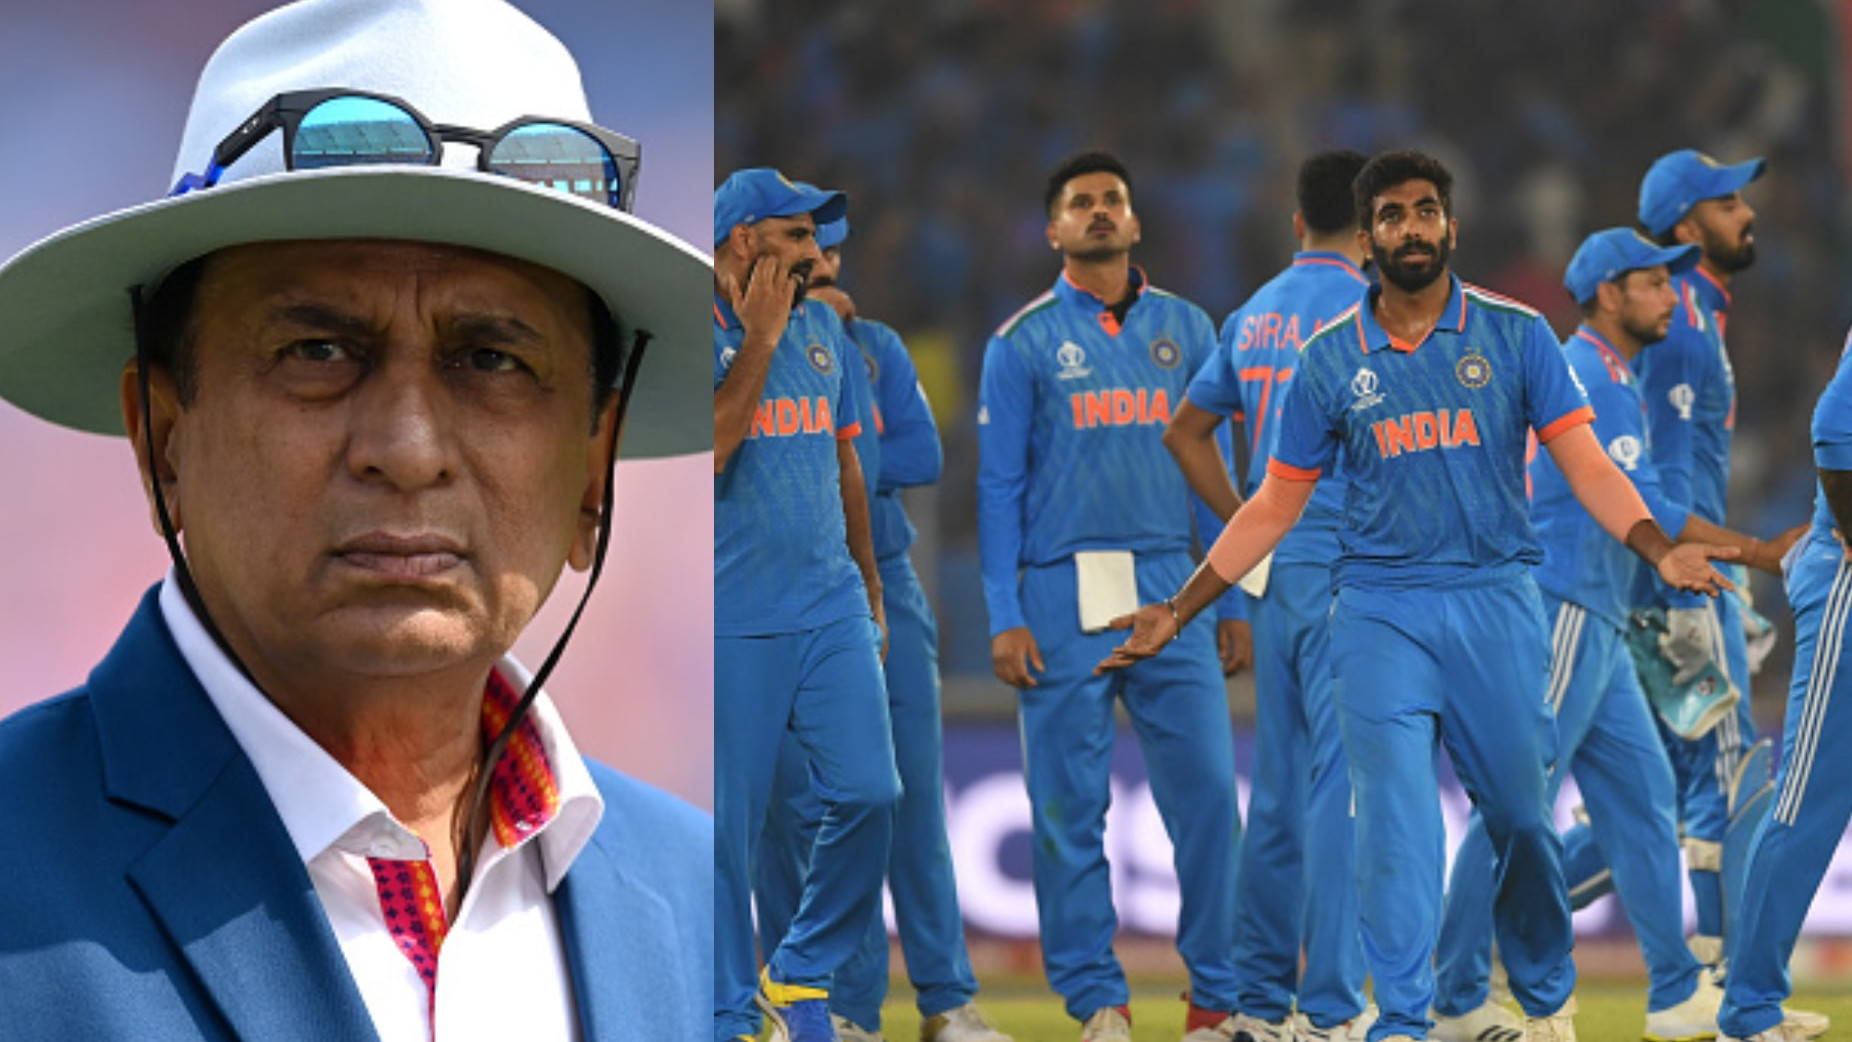 CWC 2023: “All of us have to be mighty proud of them”- Sunil Gavaskar on Team India’s performance